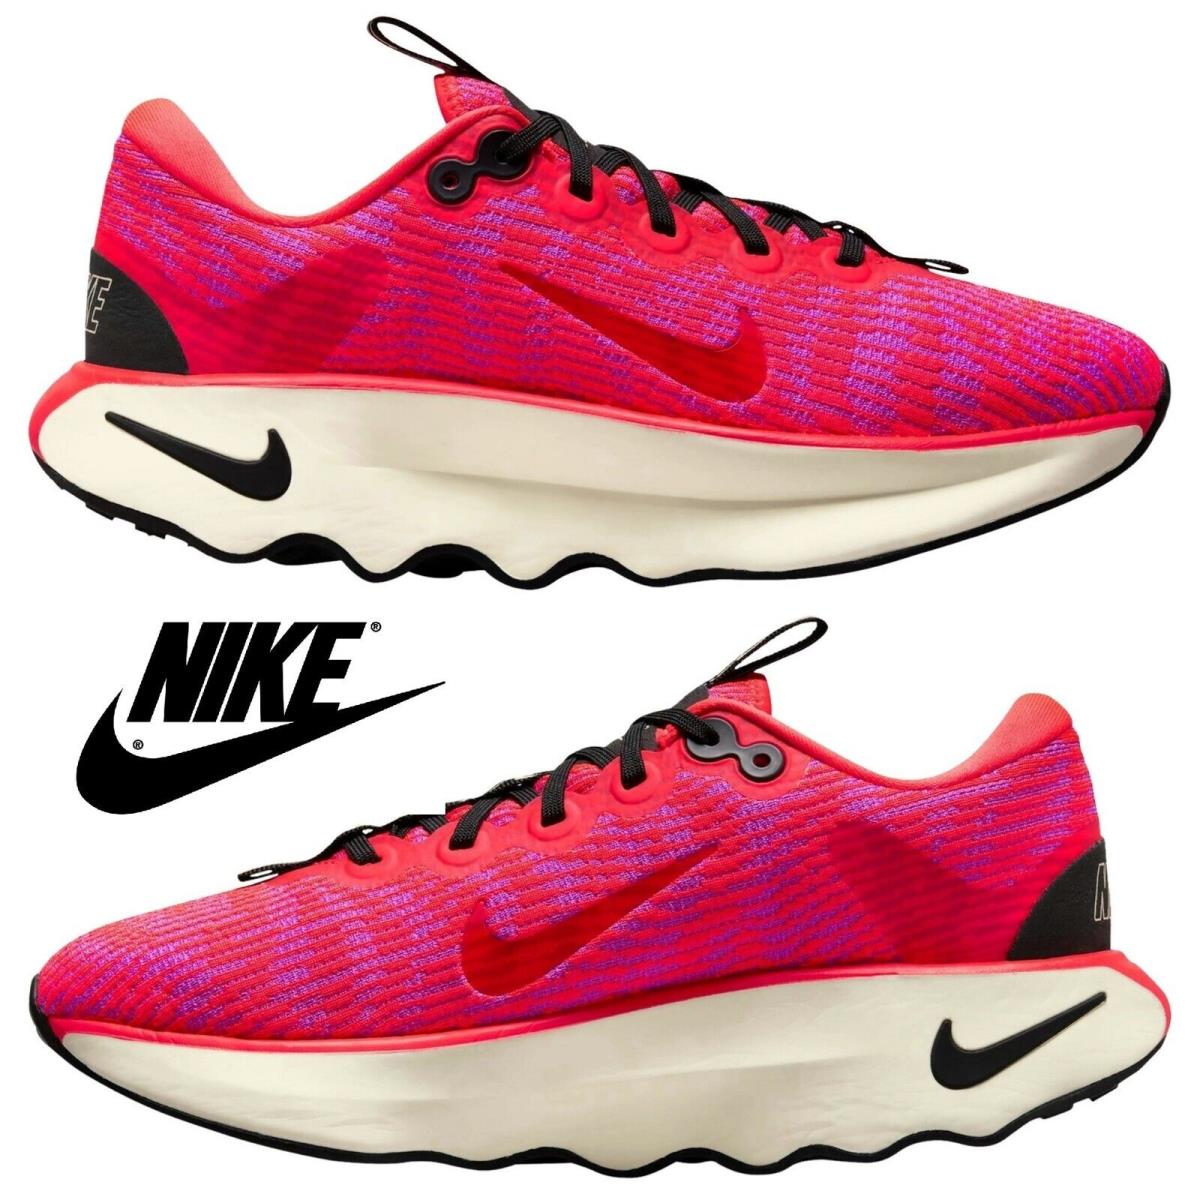 Nike Women`s Motiva Running Shoes Running Sport Gym Casual Sneakers Red